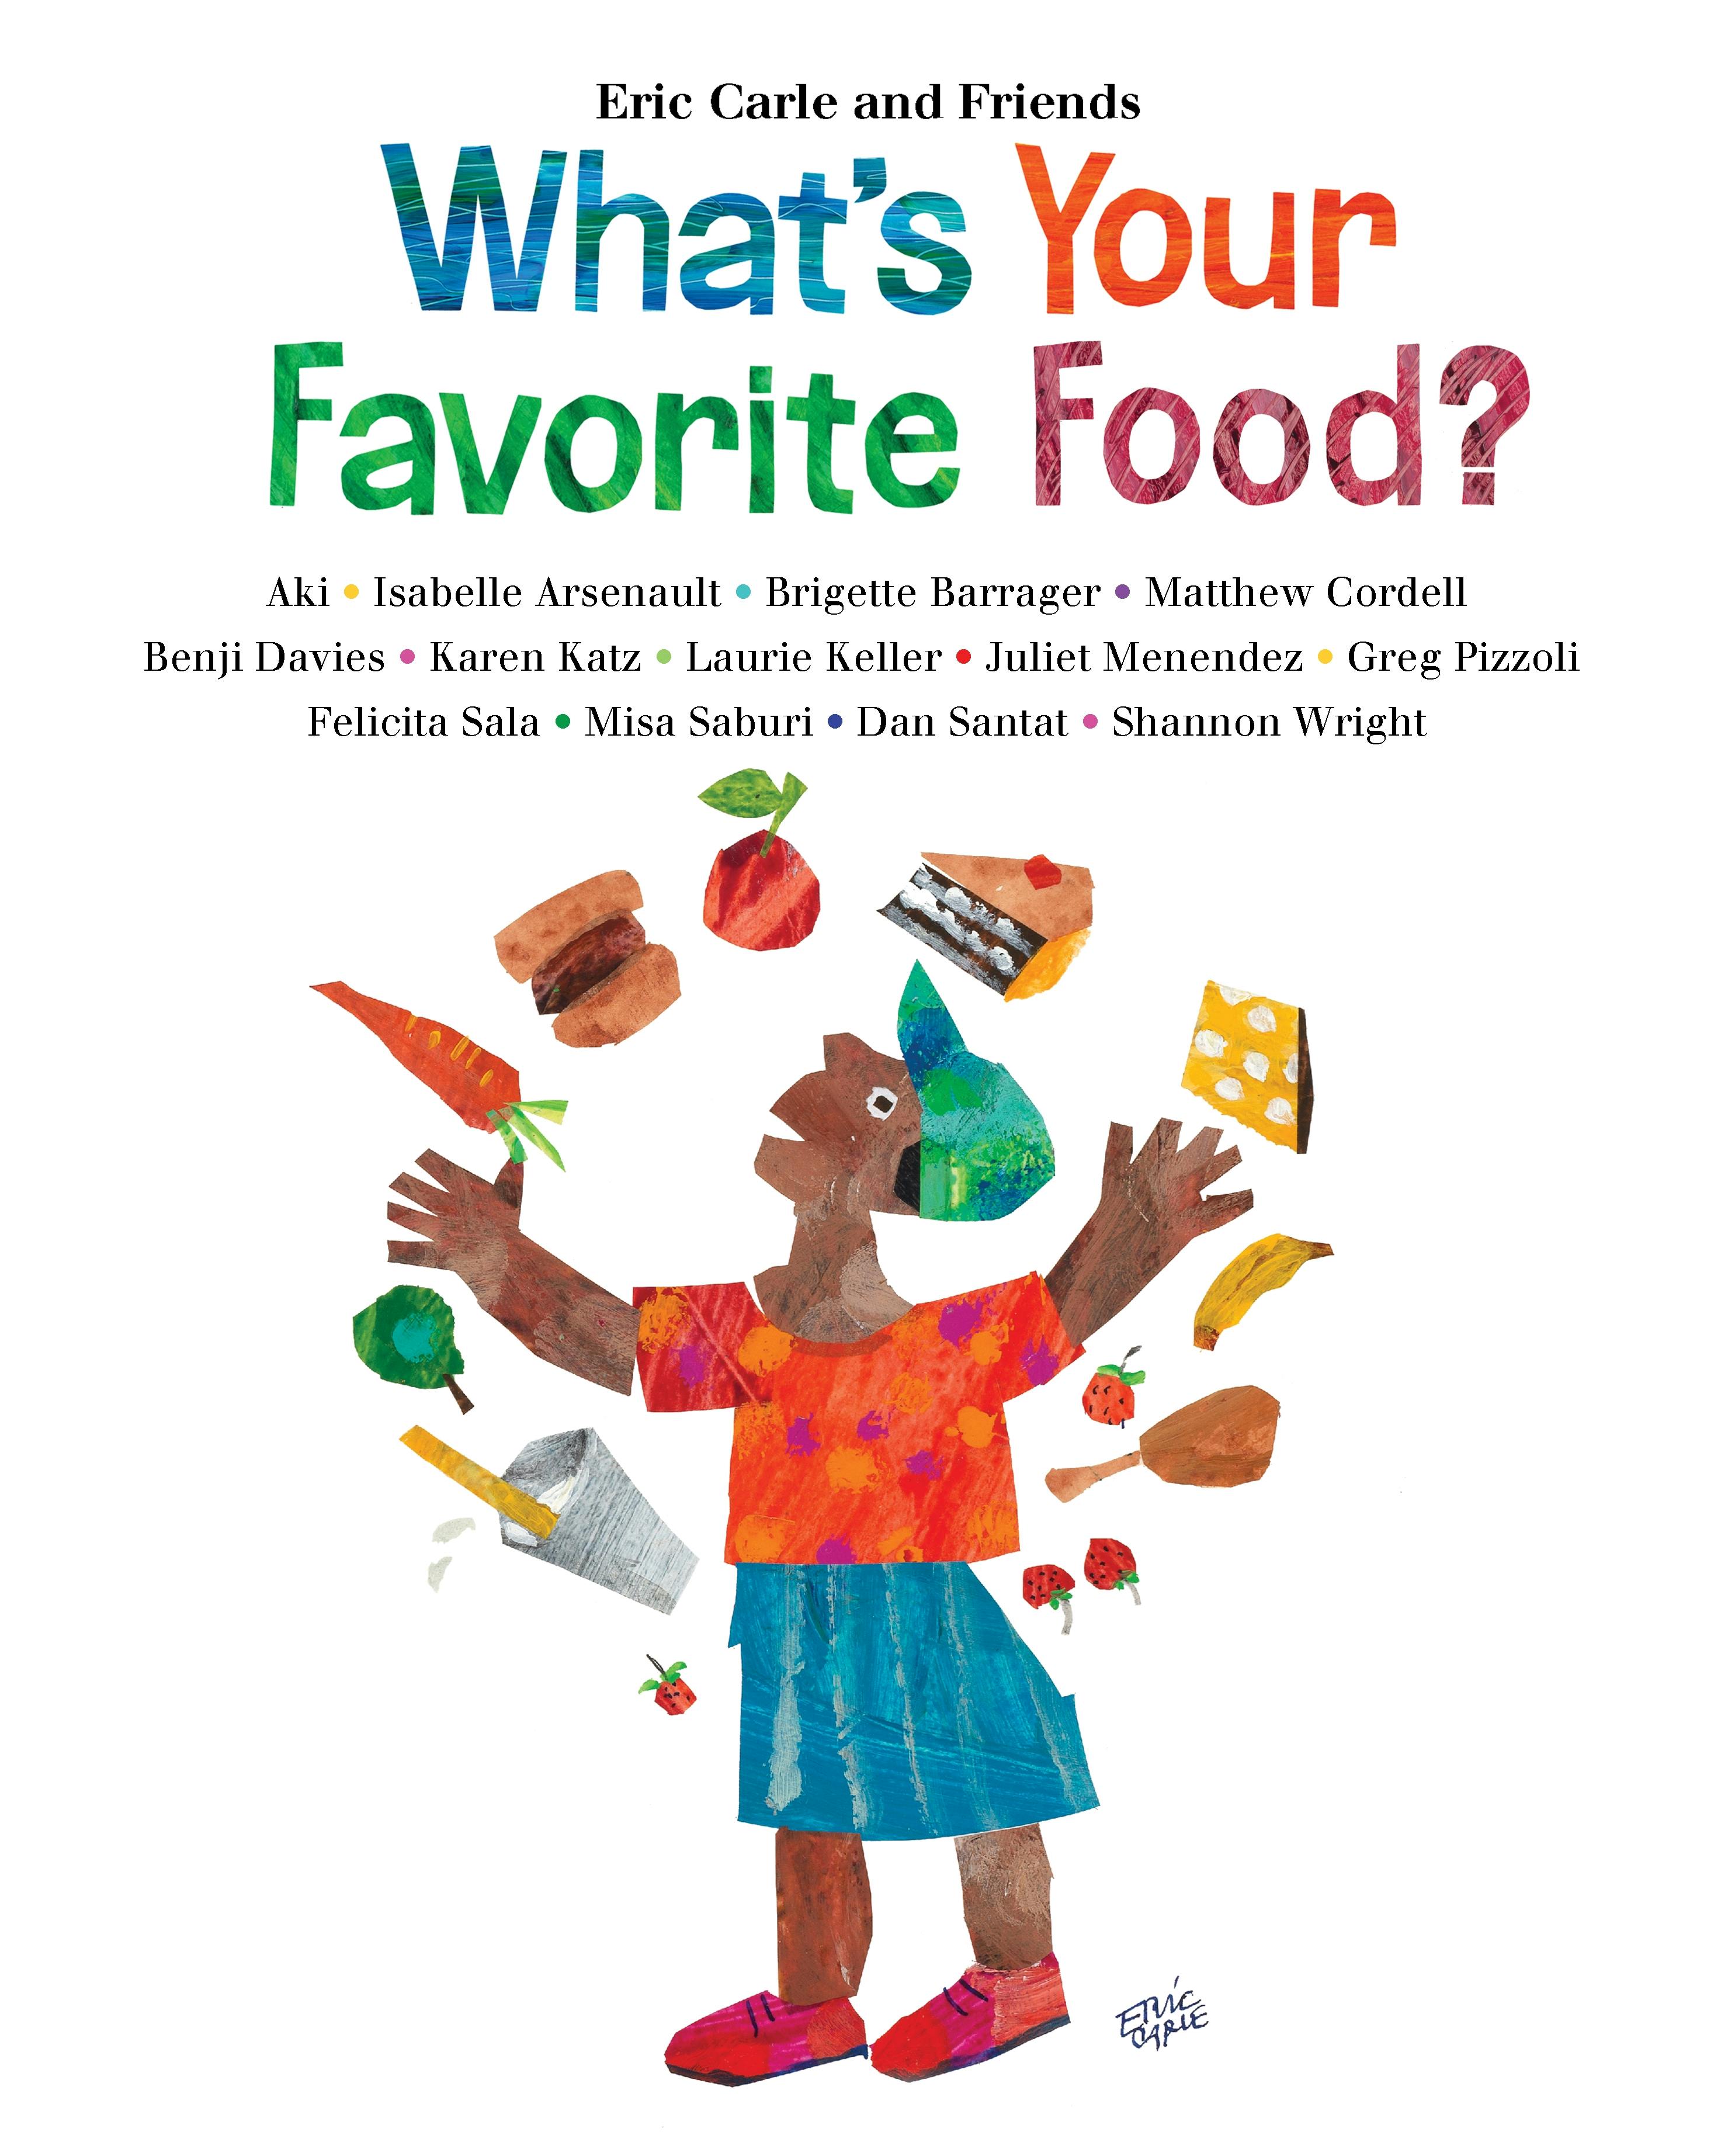 what's your favorite food and why - Vernie Underhill